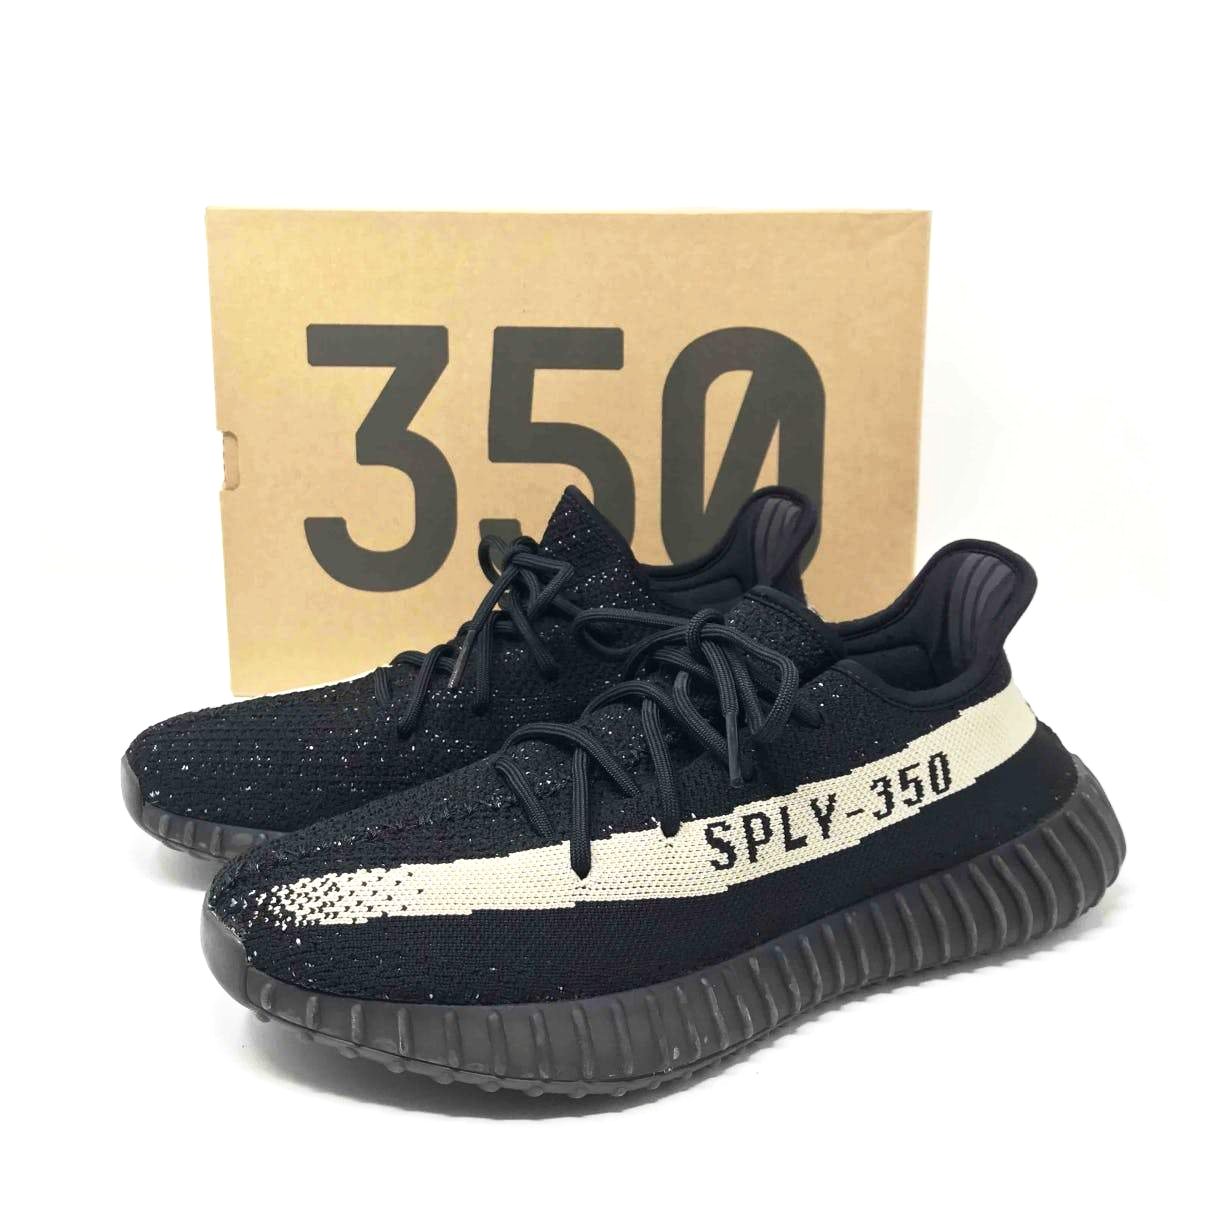 Yeezy X Adidas Boost Sneakers in Black - Size 10.5